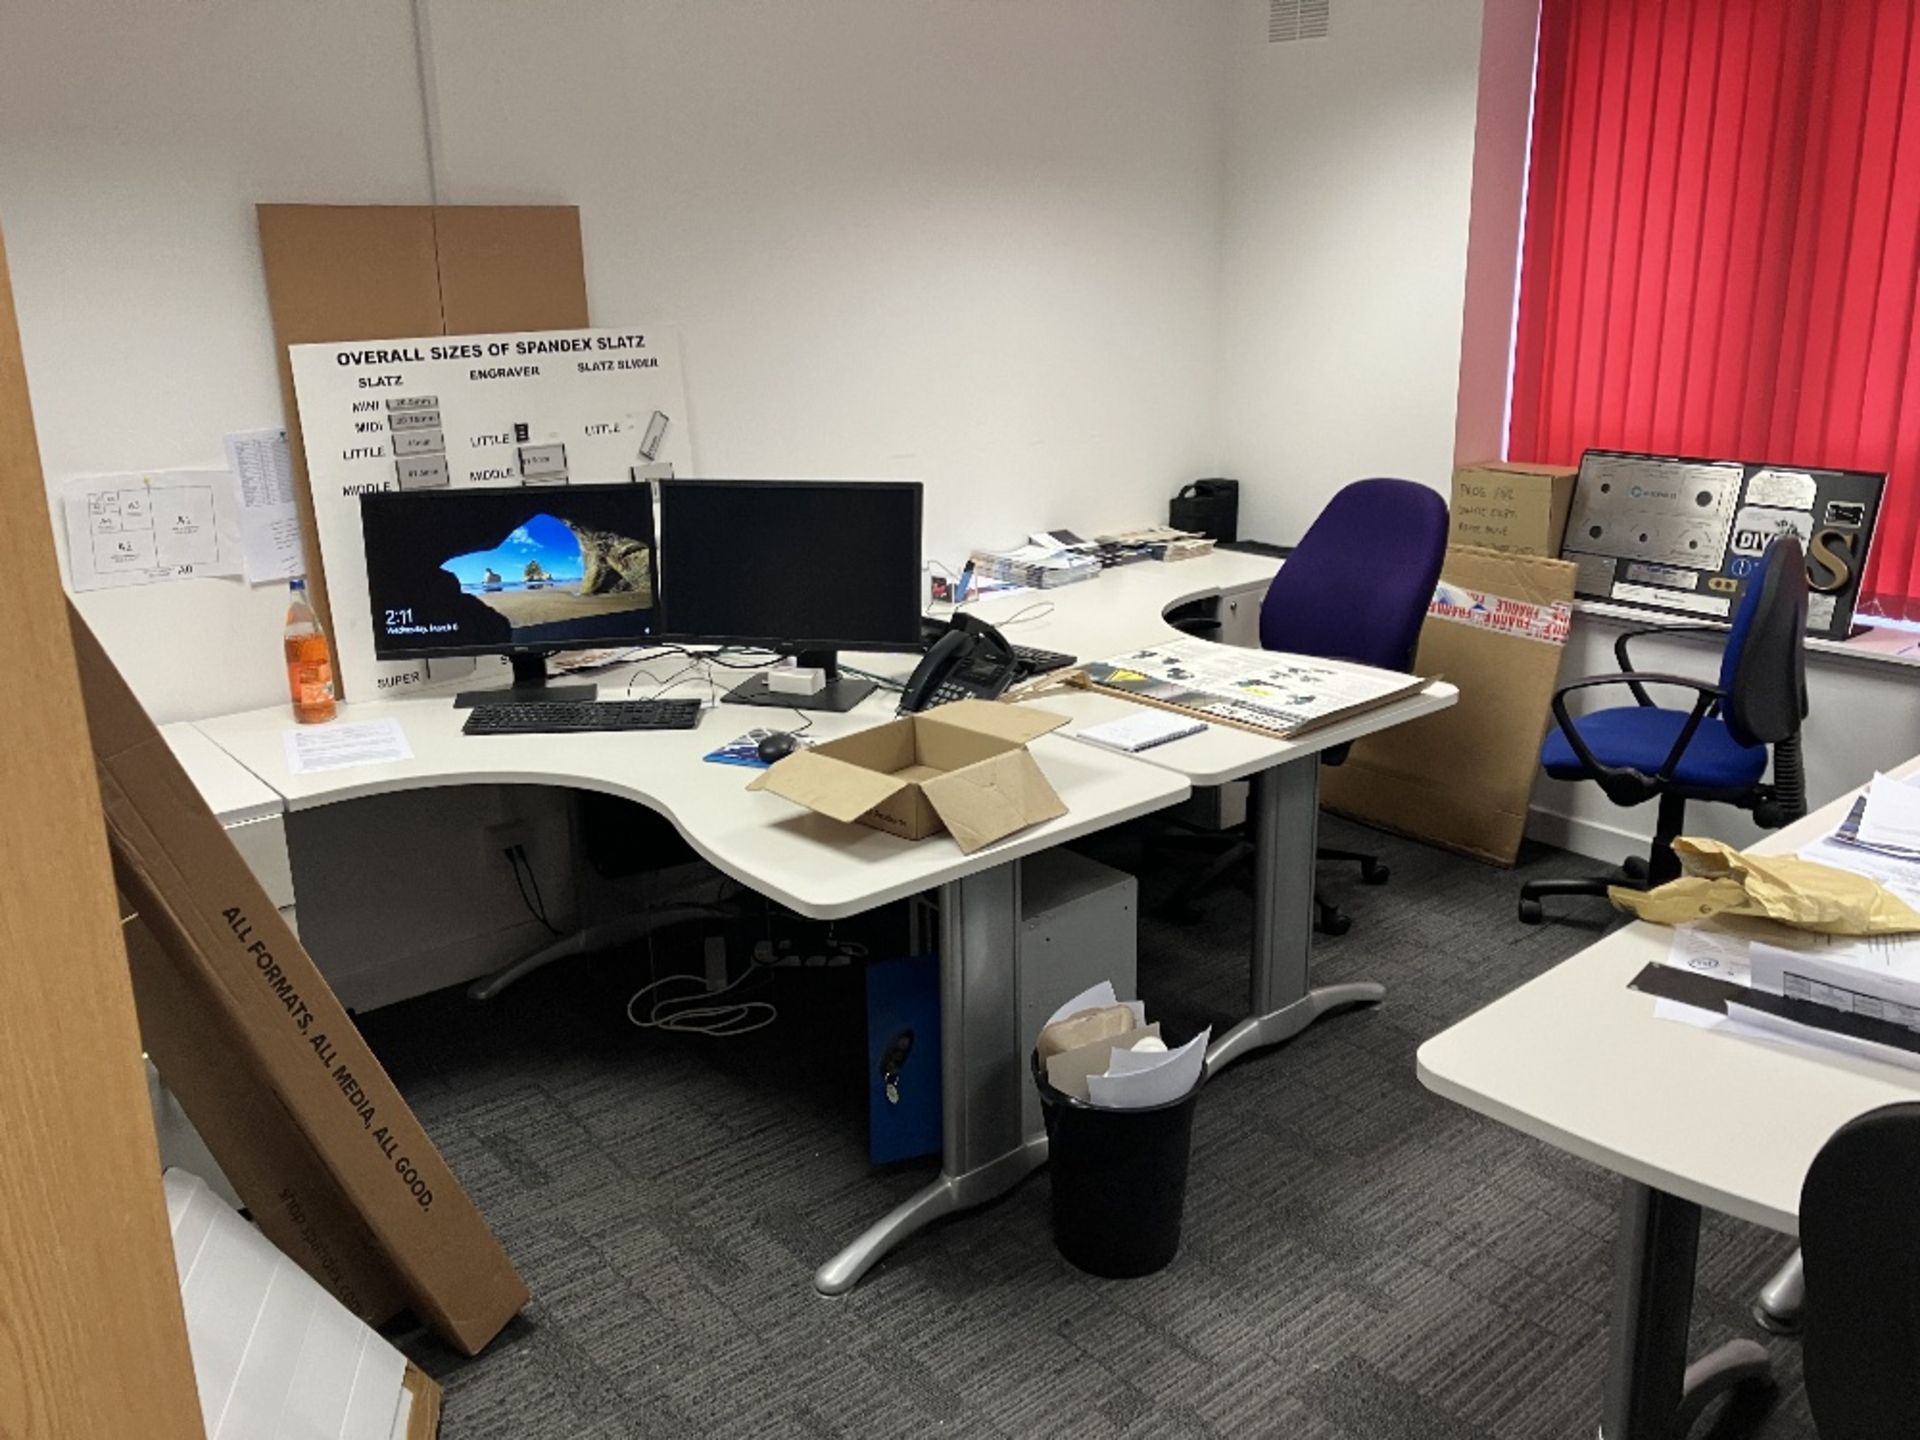 contents of office 4 curved desks 4 chairs 4 pedistals 3 screens - Image 2 of 6